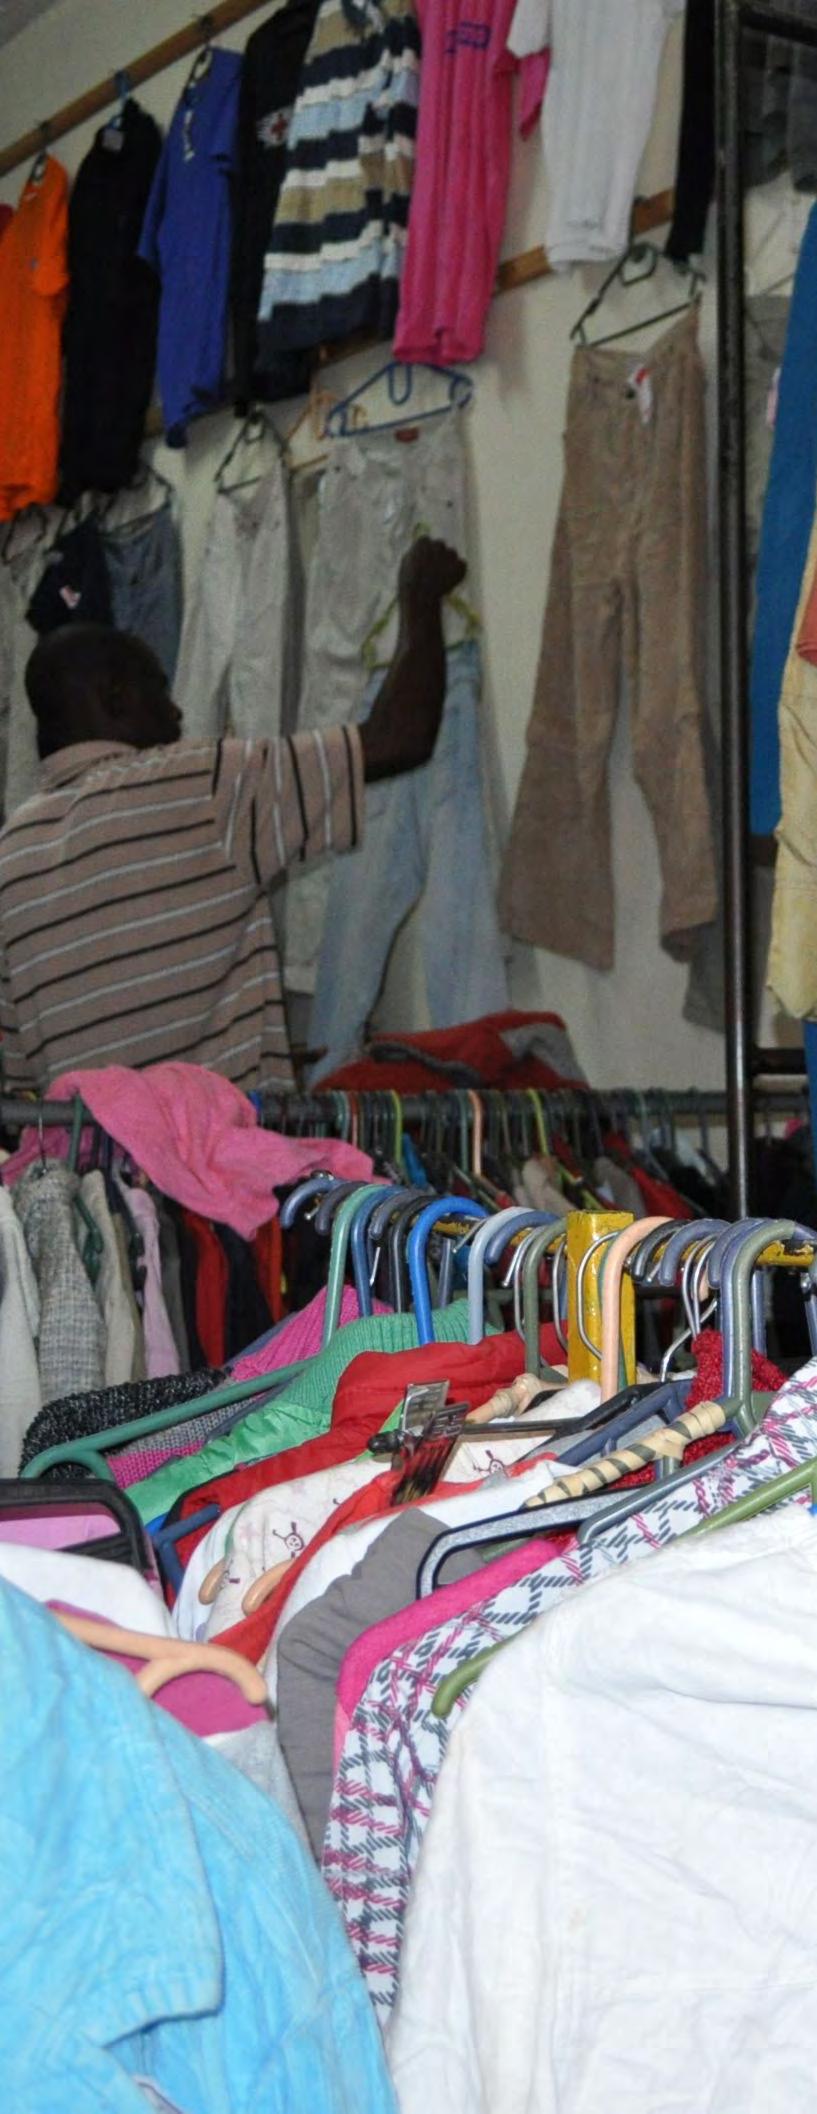 The clothes situation in Mozambique 42 million tons of clothes are produced in the world every year. This corresponds to 15 pieces per person.